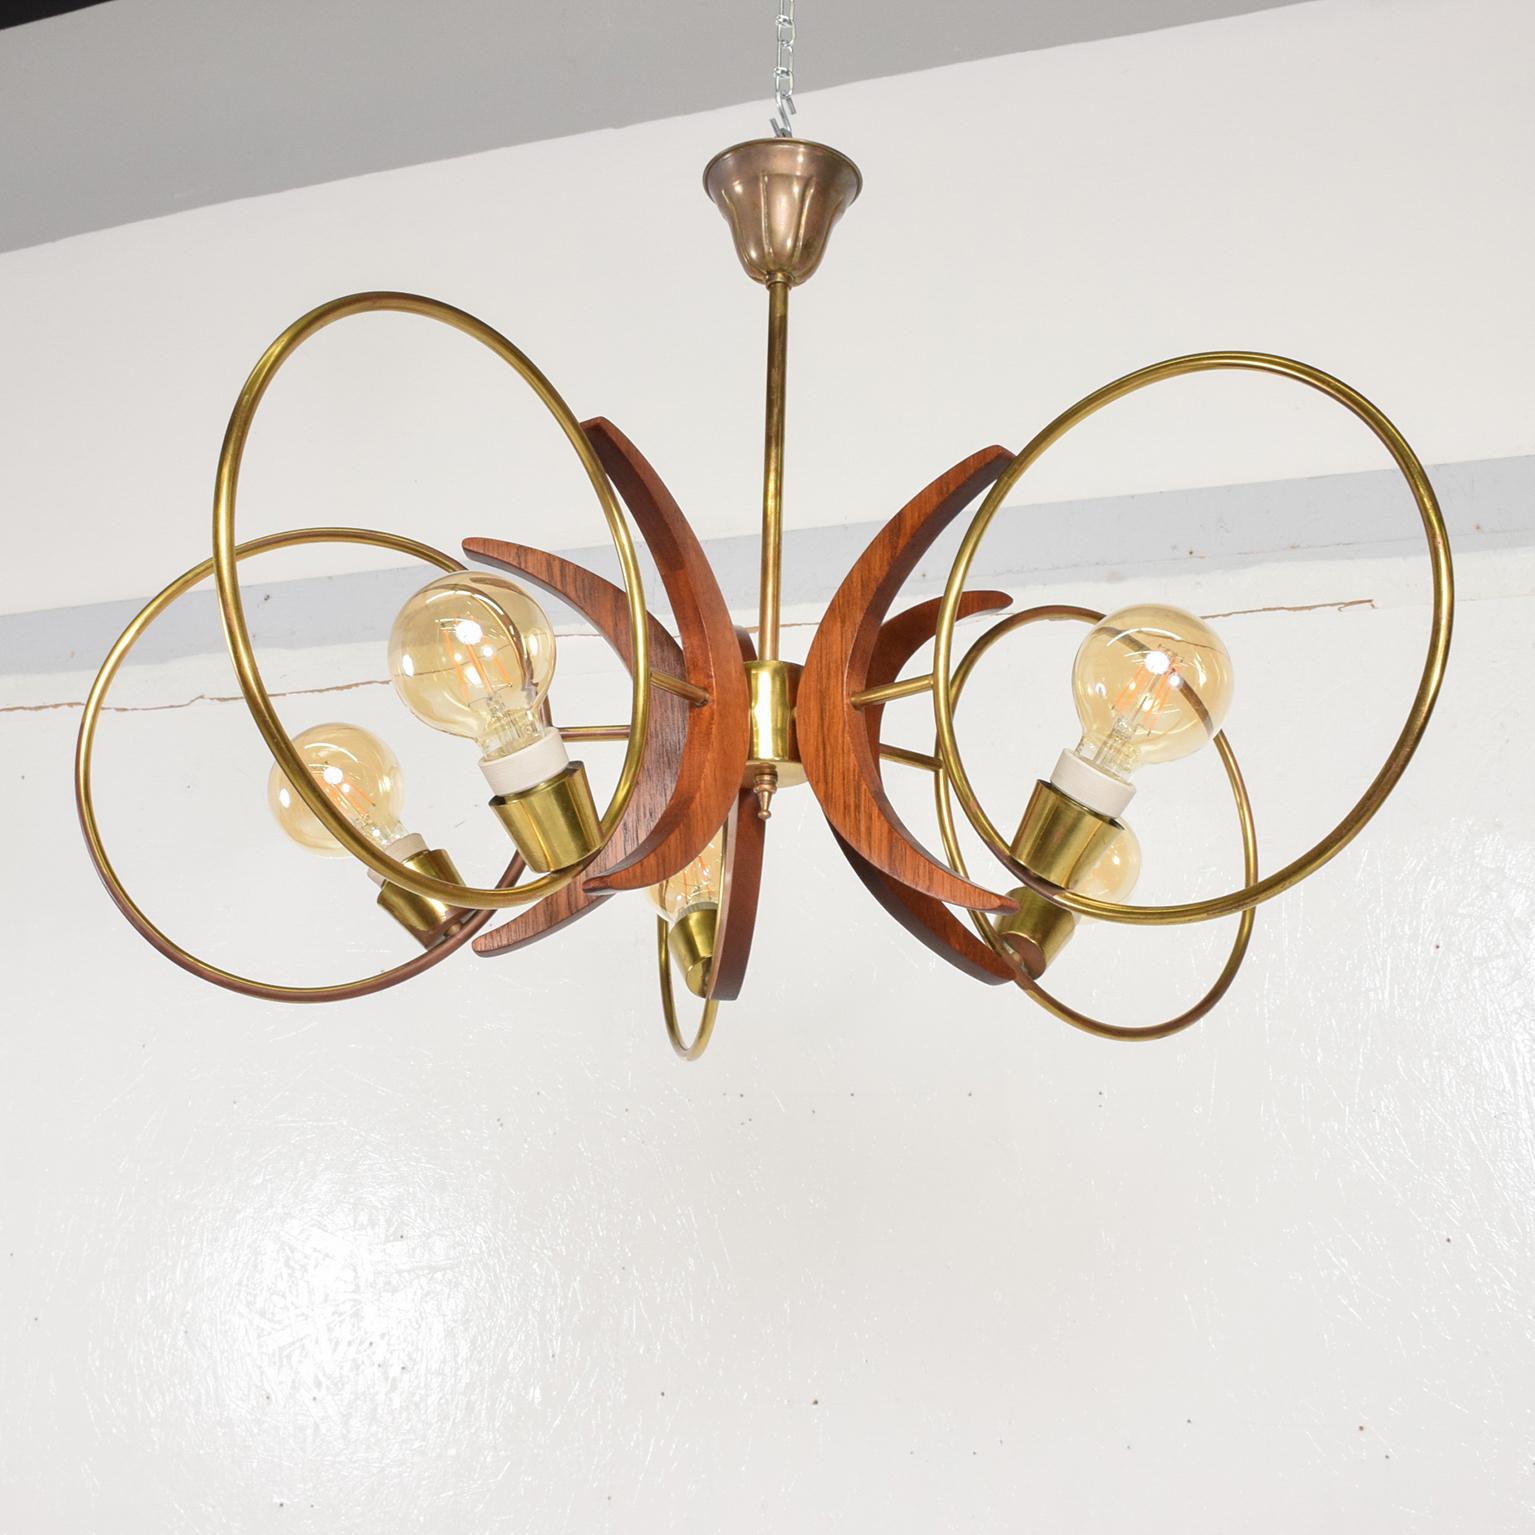 Mid-Century Modern 1960s Alluring Five Ring Sculptural Chandelier Brass and Mahogany Mexico City For Sale